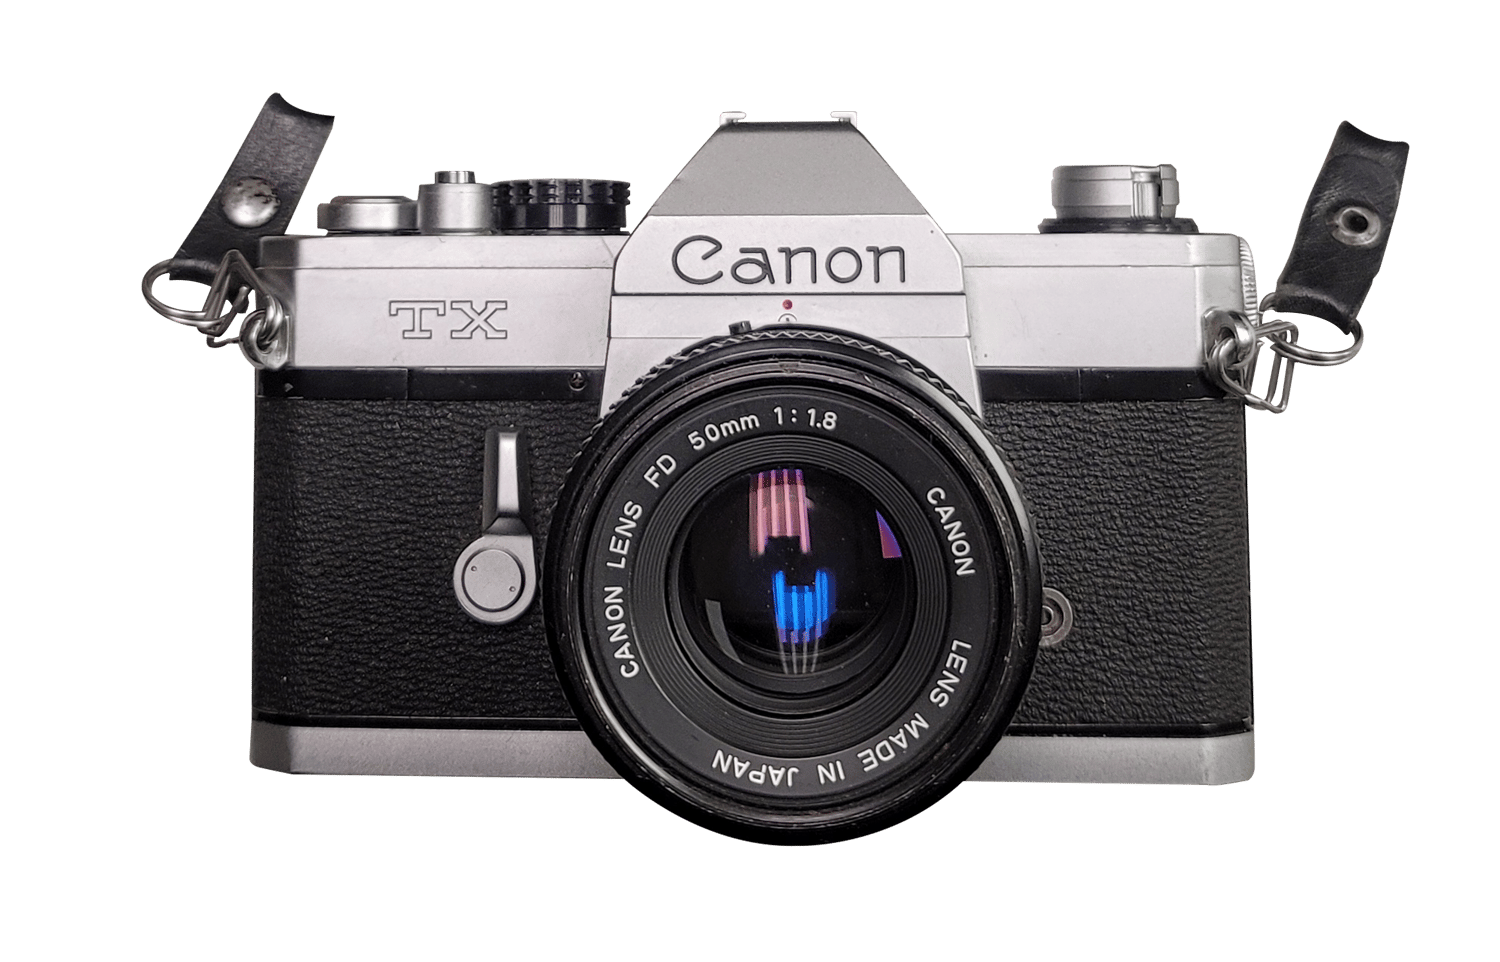 Canon TX with 50mm 1.8 